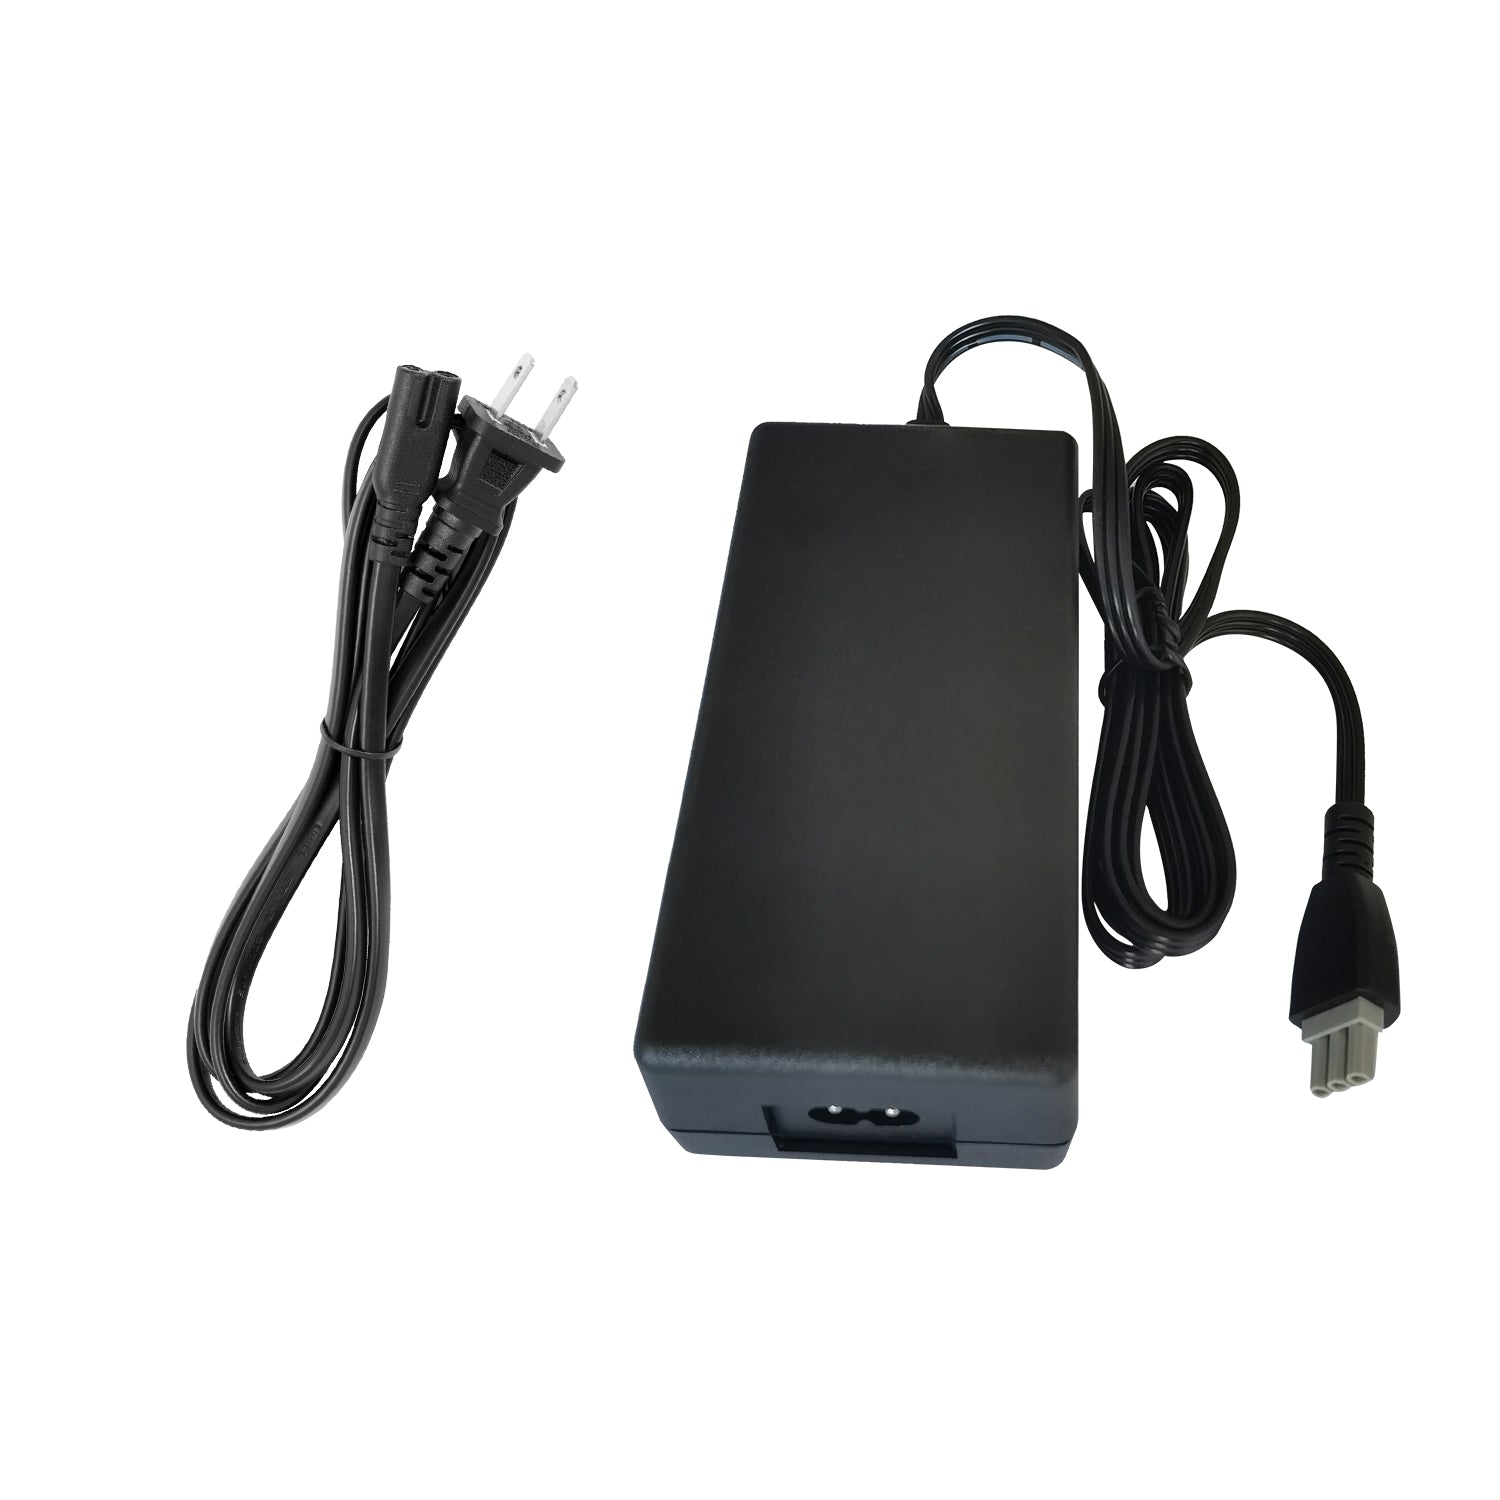 Power Adapter for HP PSC 1610 All-in-One Printer.